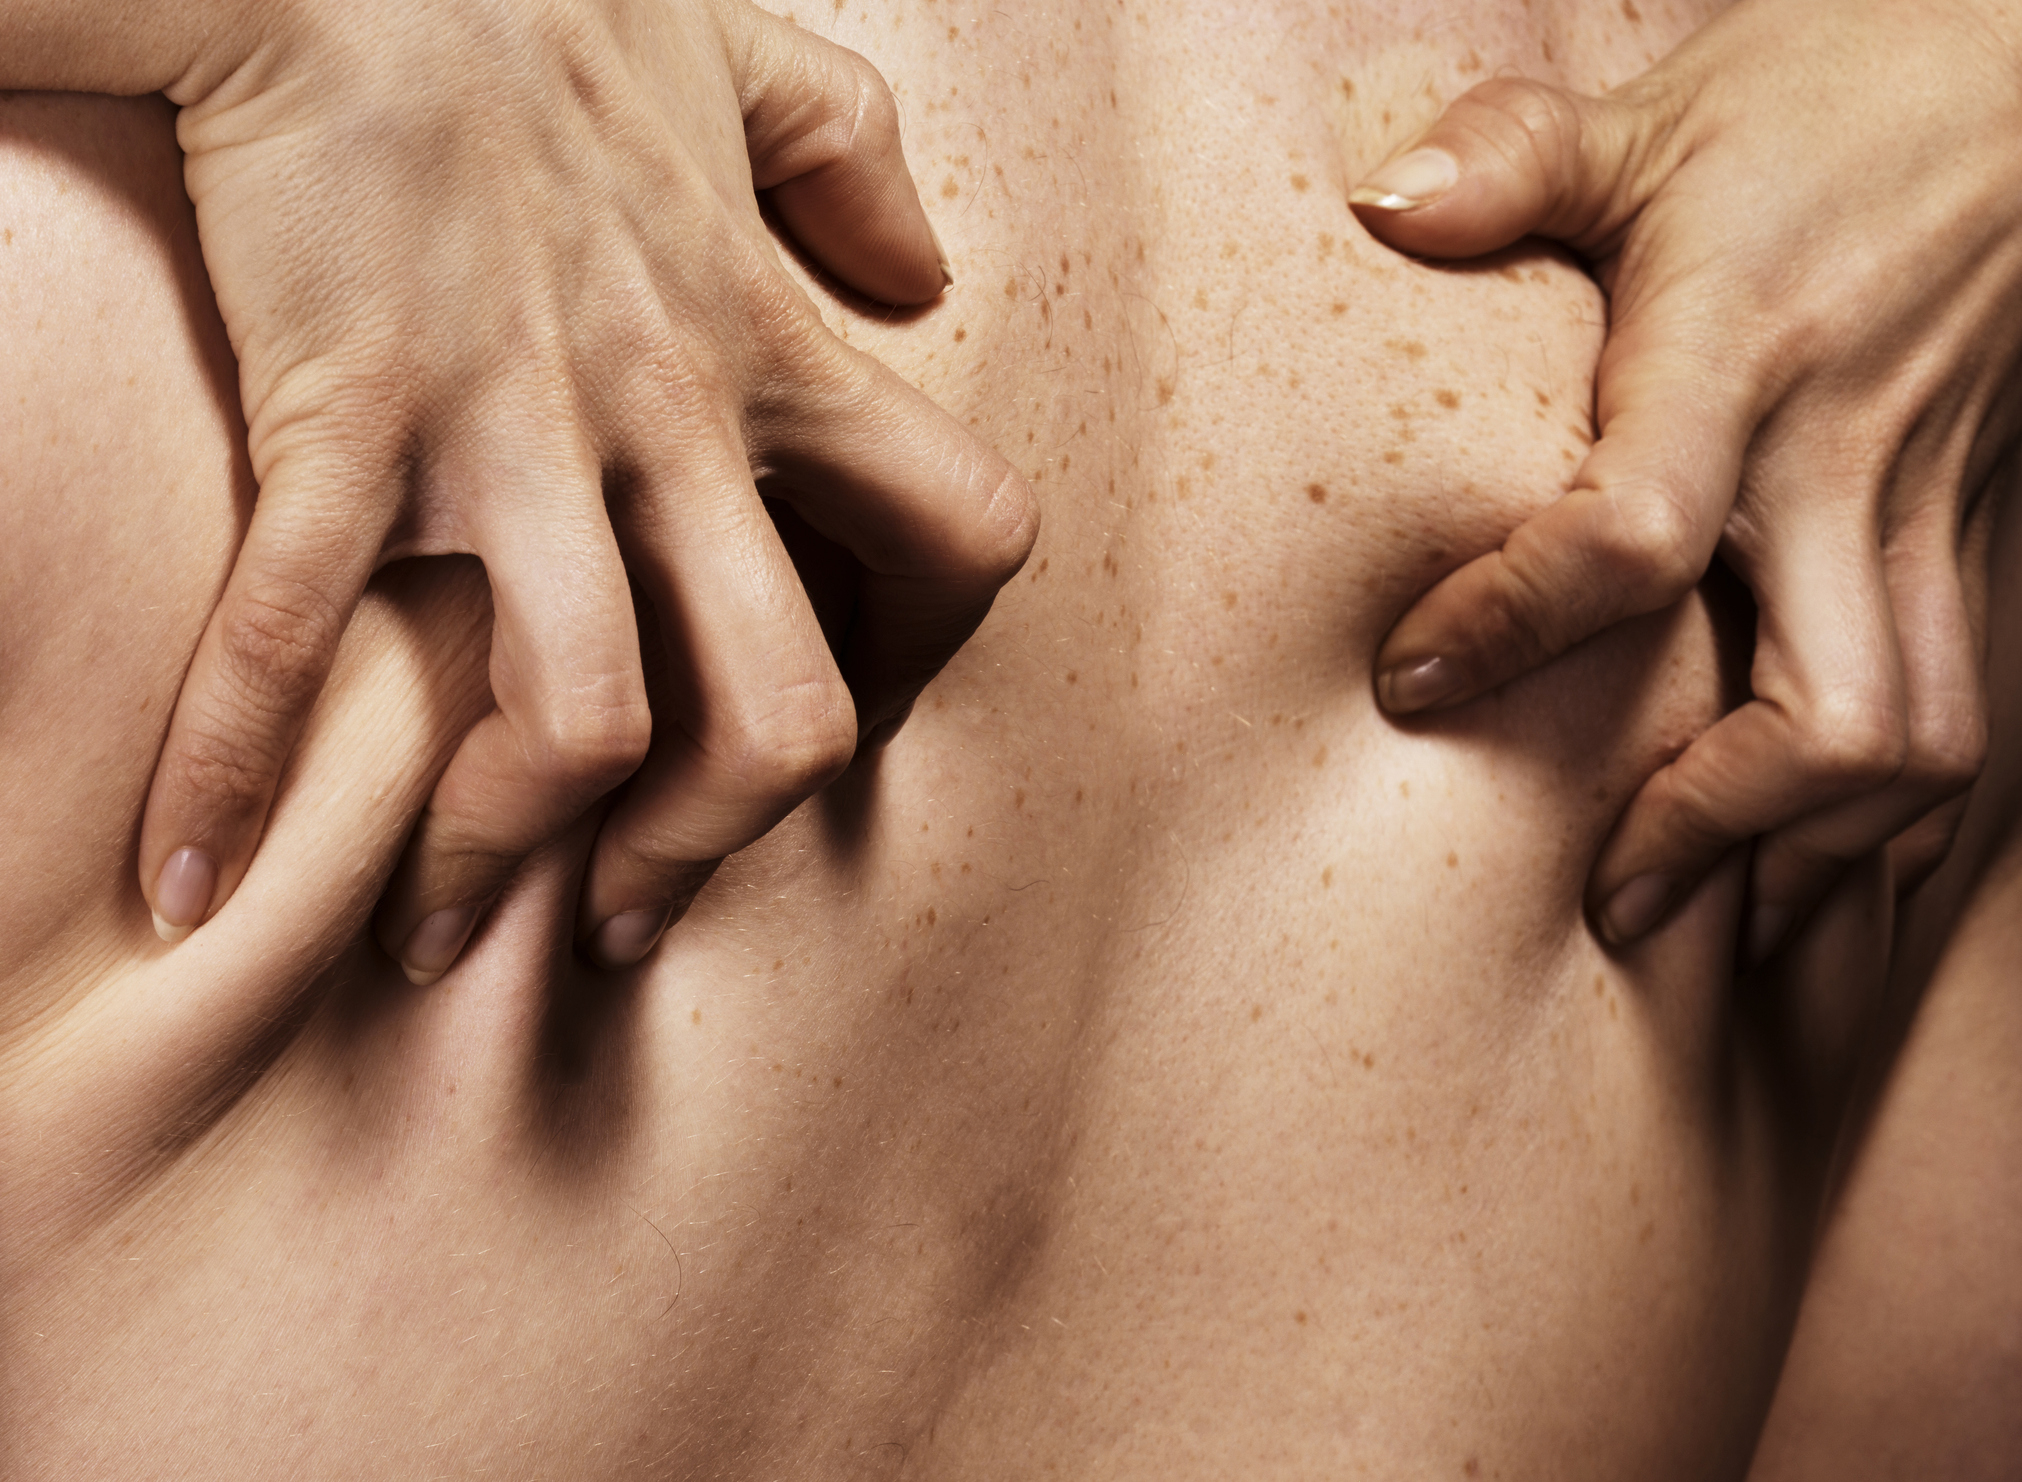 Close-up of a person&#x27;s back with another person&#x27;s hands gently pressing into their skin